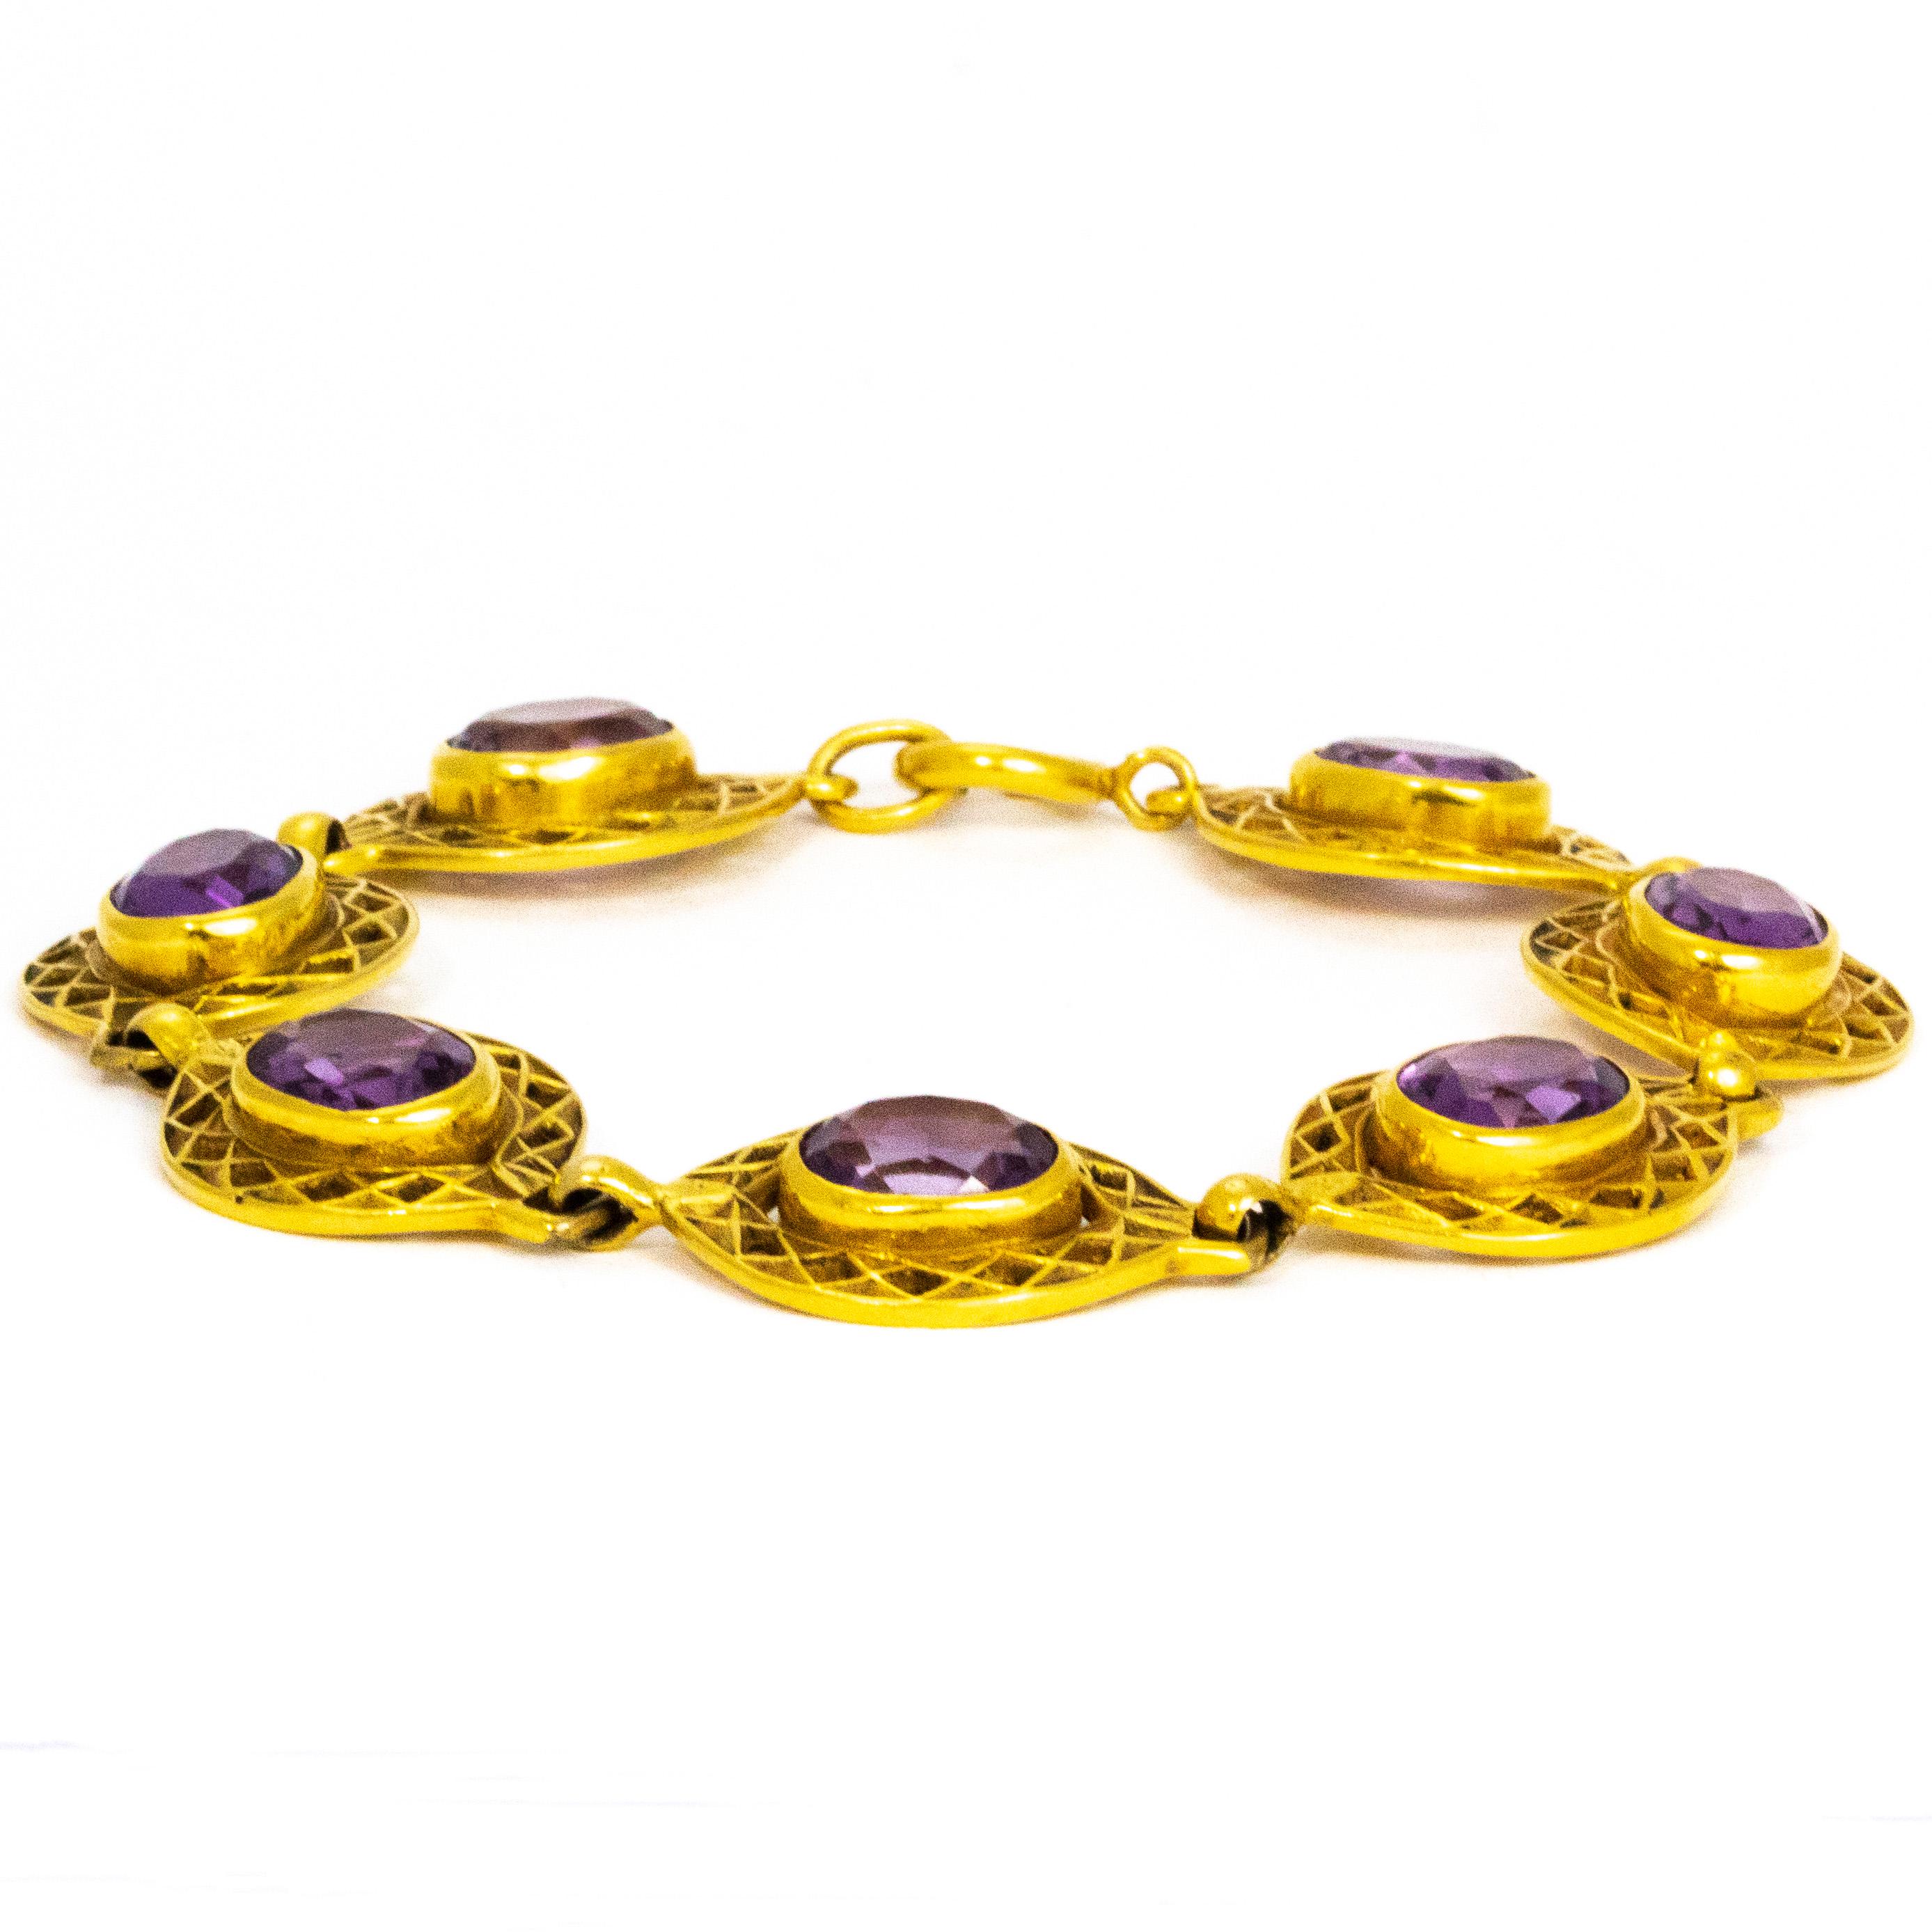 Each link in this bracelet is loaded with detail and holds seven gorgeous amethyst stones measuring 2carats each. The style of the bracelet has a very Art Deco feel and is wonderfully stylish. 

Bracelet Length: 7.5inches
Width: 16mm 